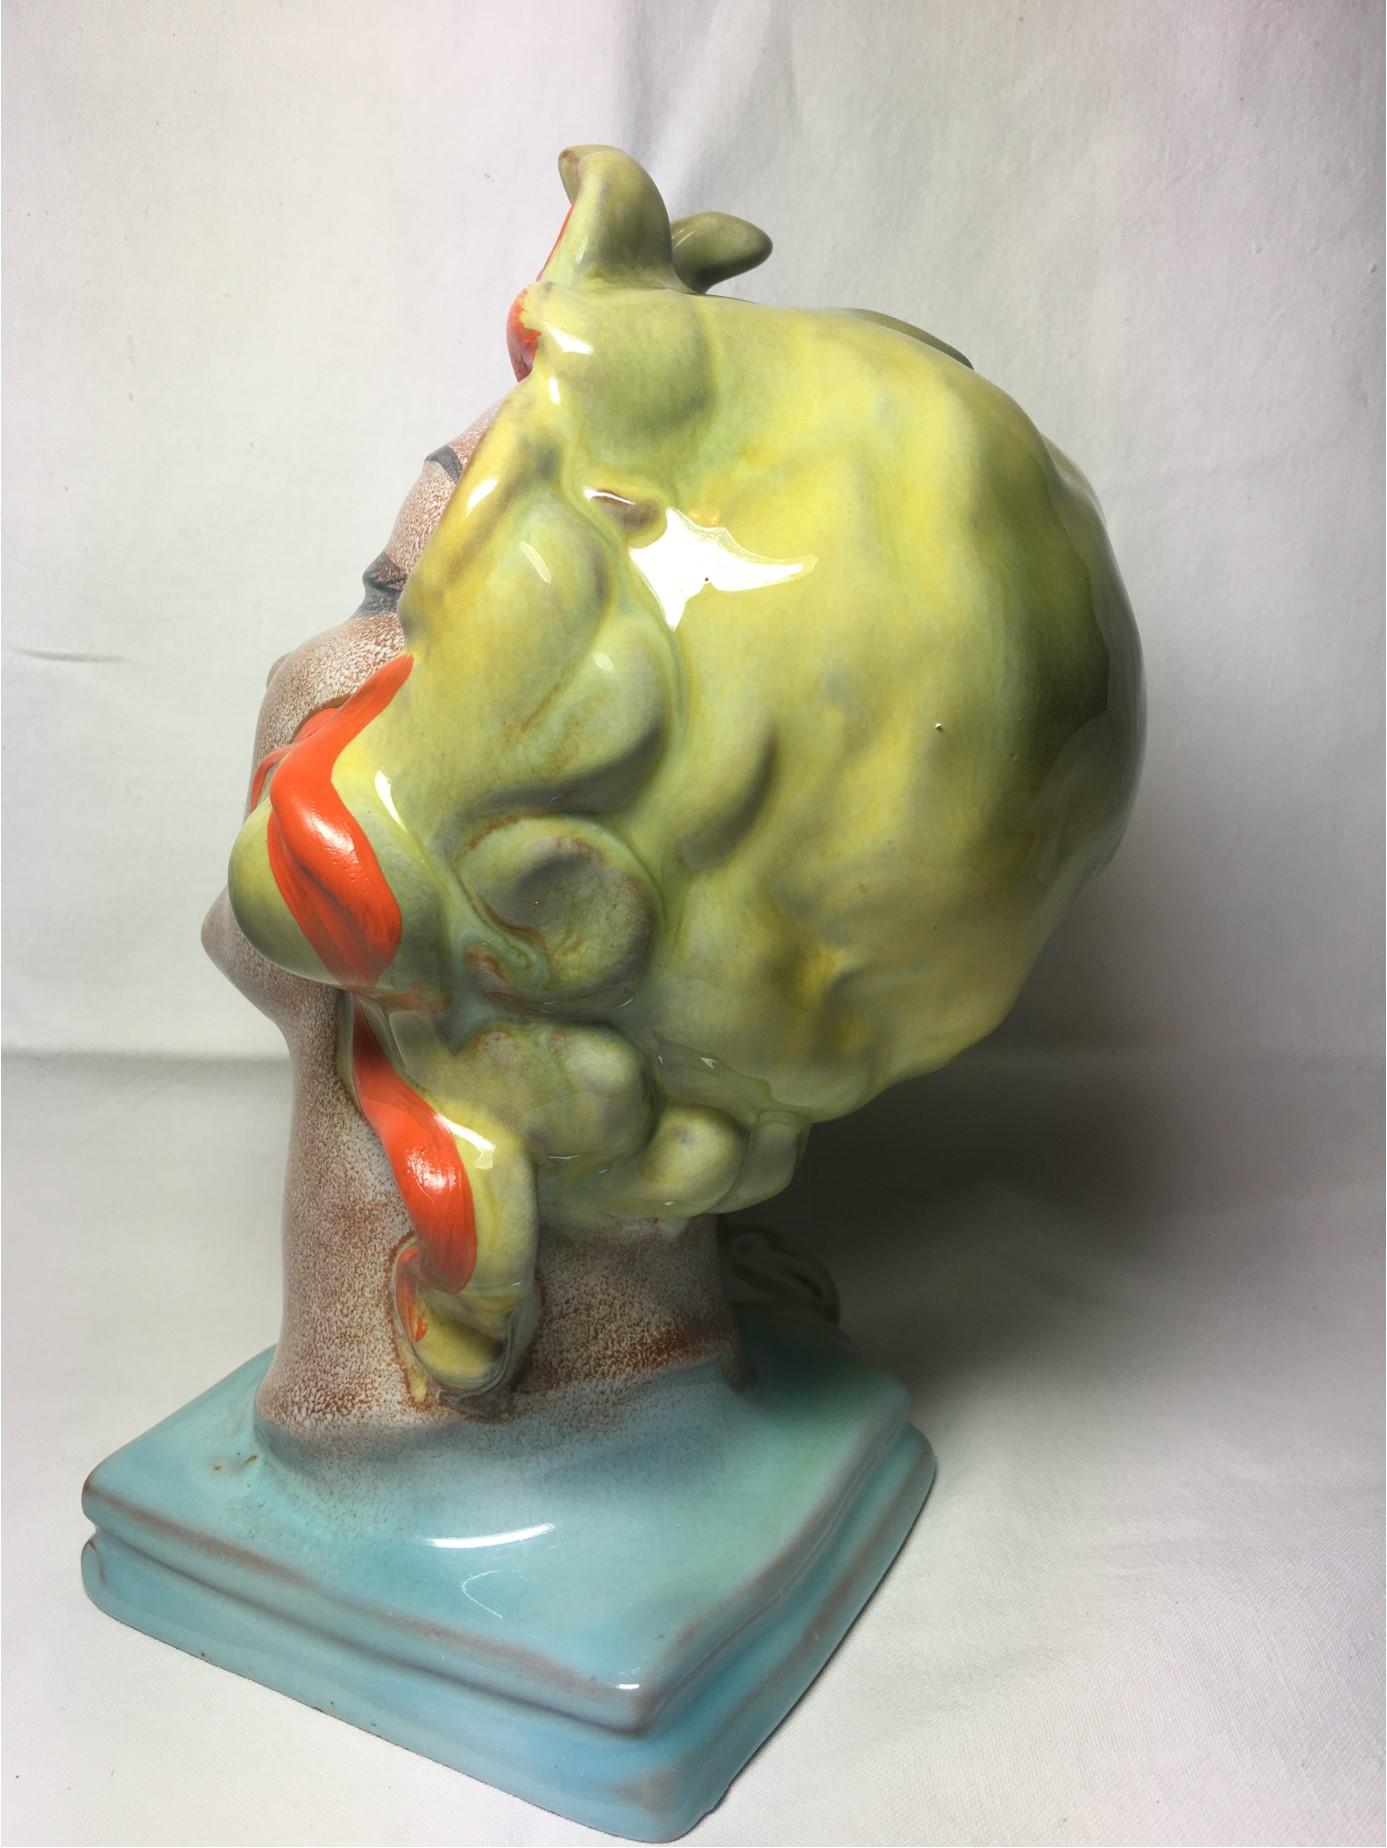 German Expressive Art Deco Womans Ceramic Head from the Late 1930s Early 1940s For Sale